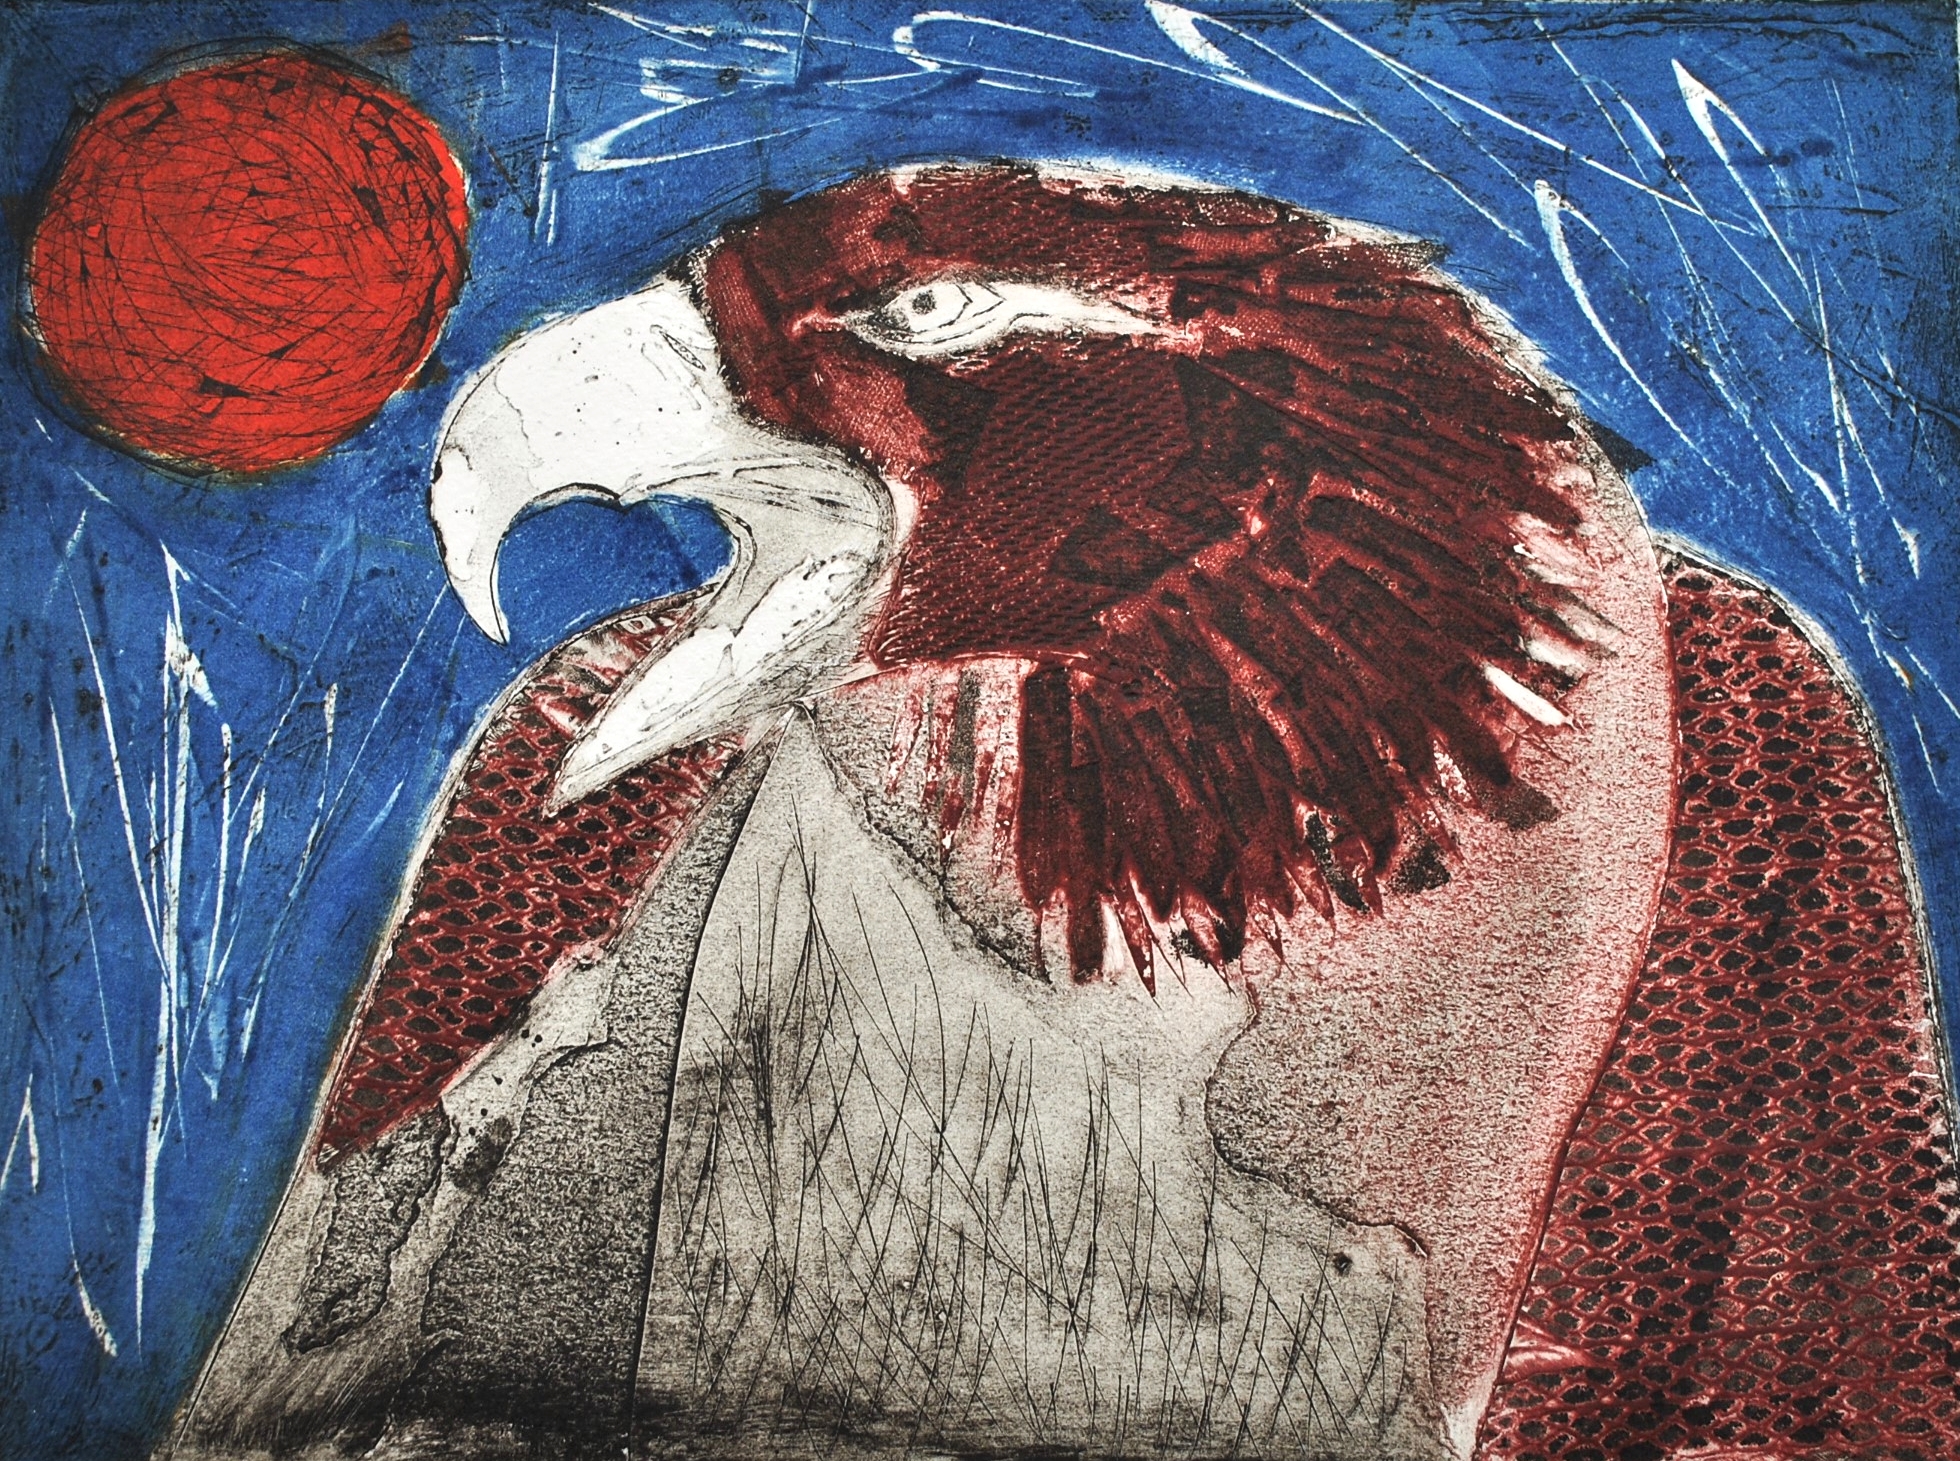 Eagle 1, original collagraph by Genevieve Lavers